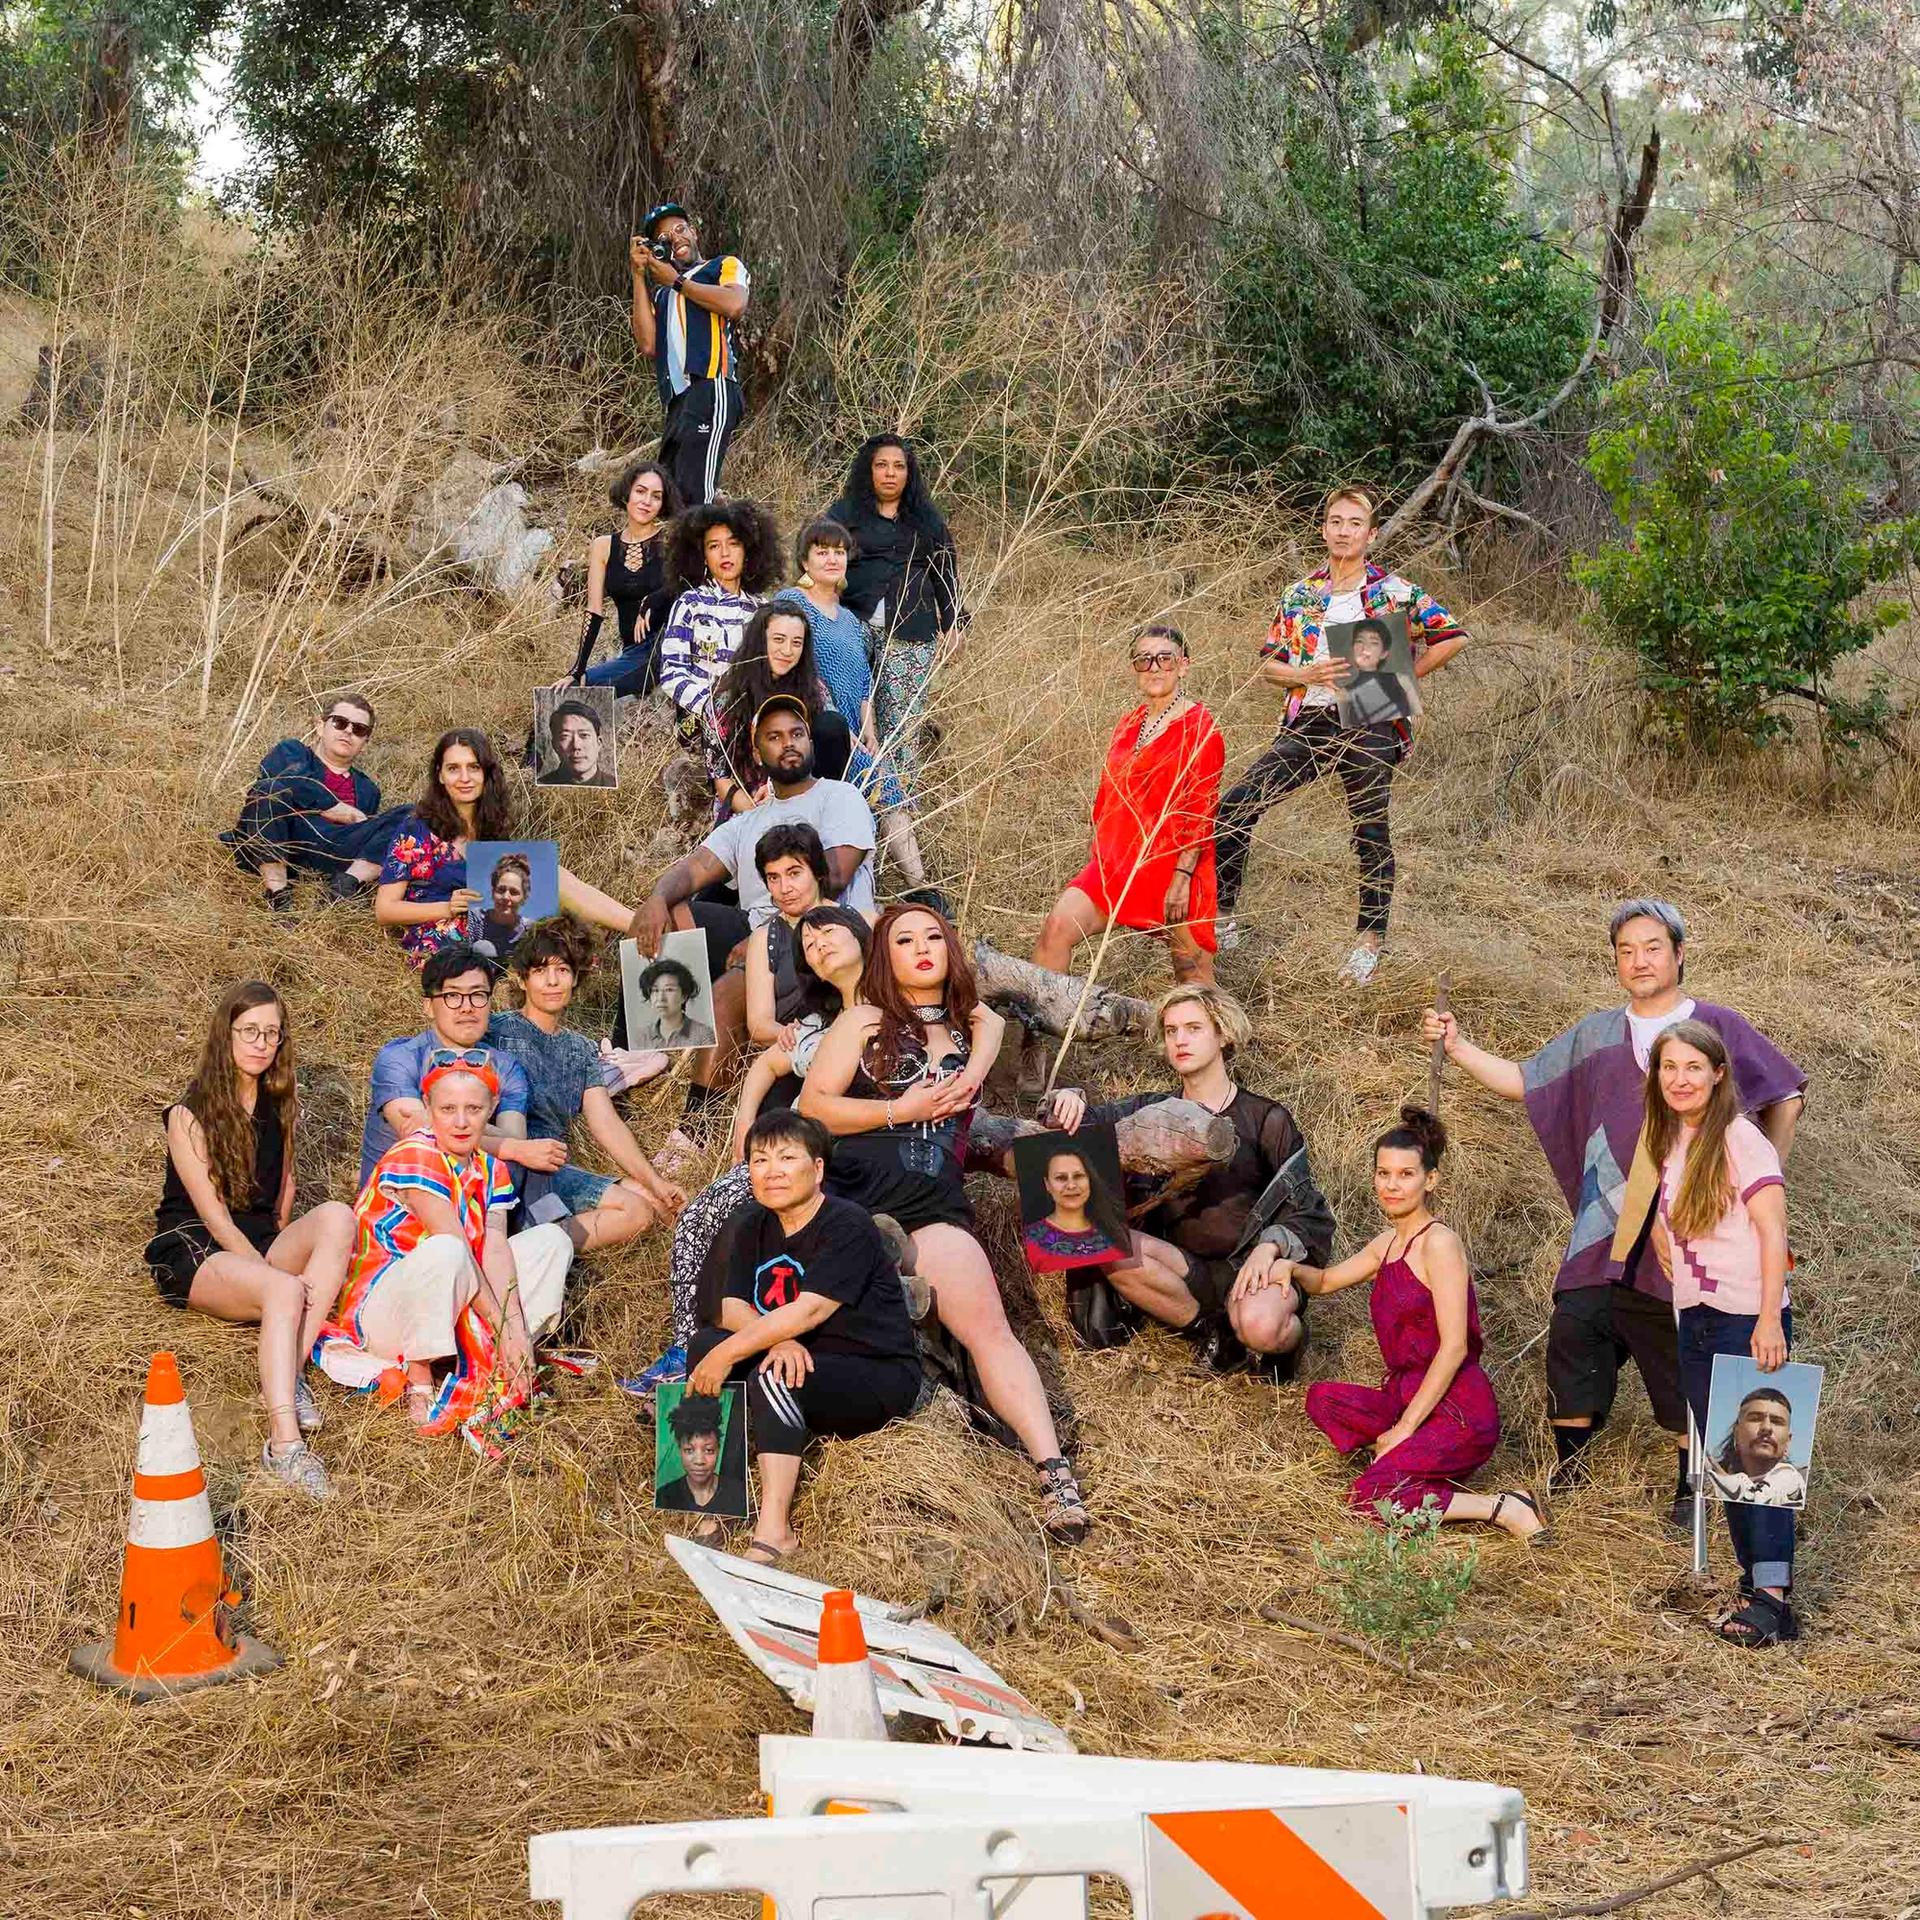 Commonwealth and Council gallery family portrait at Elysian Park, Los Angeles. Photo: Ruben Diaz